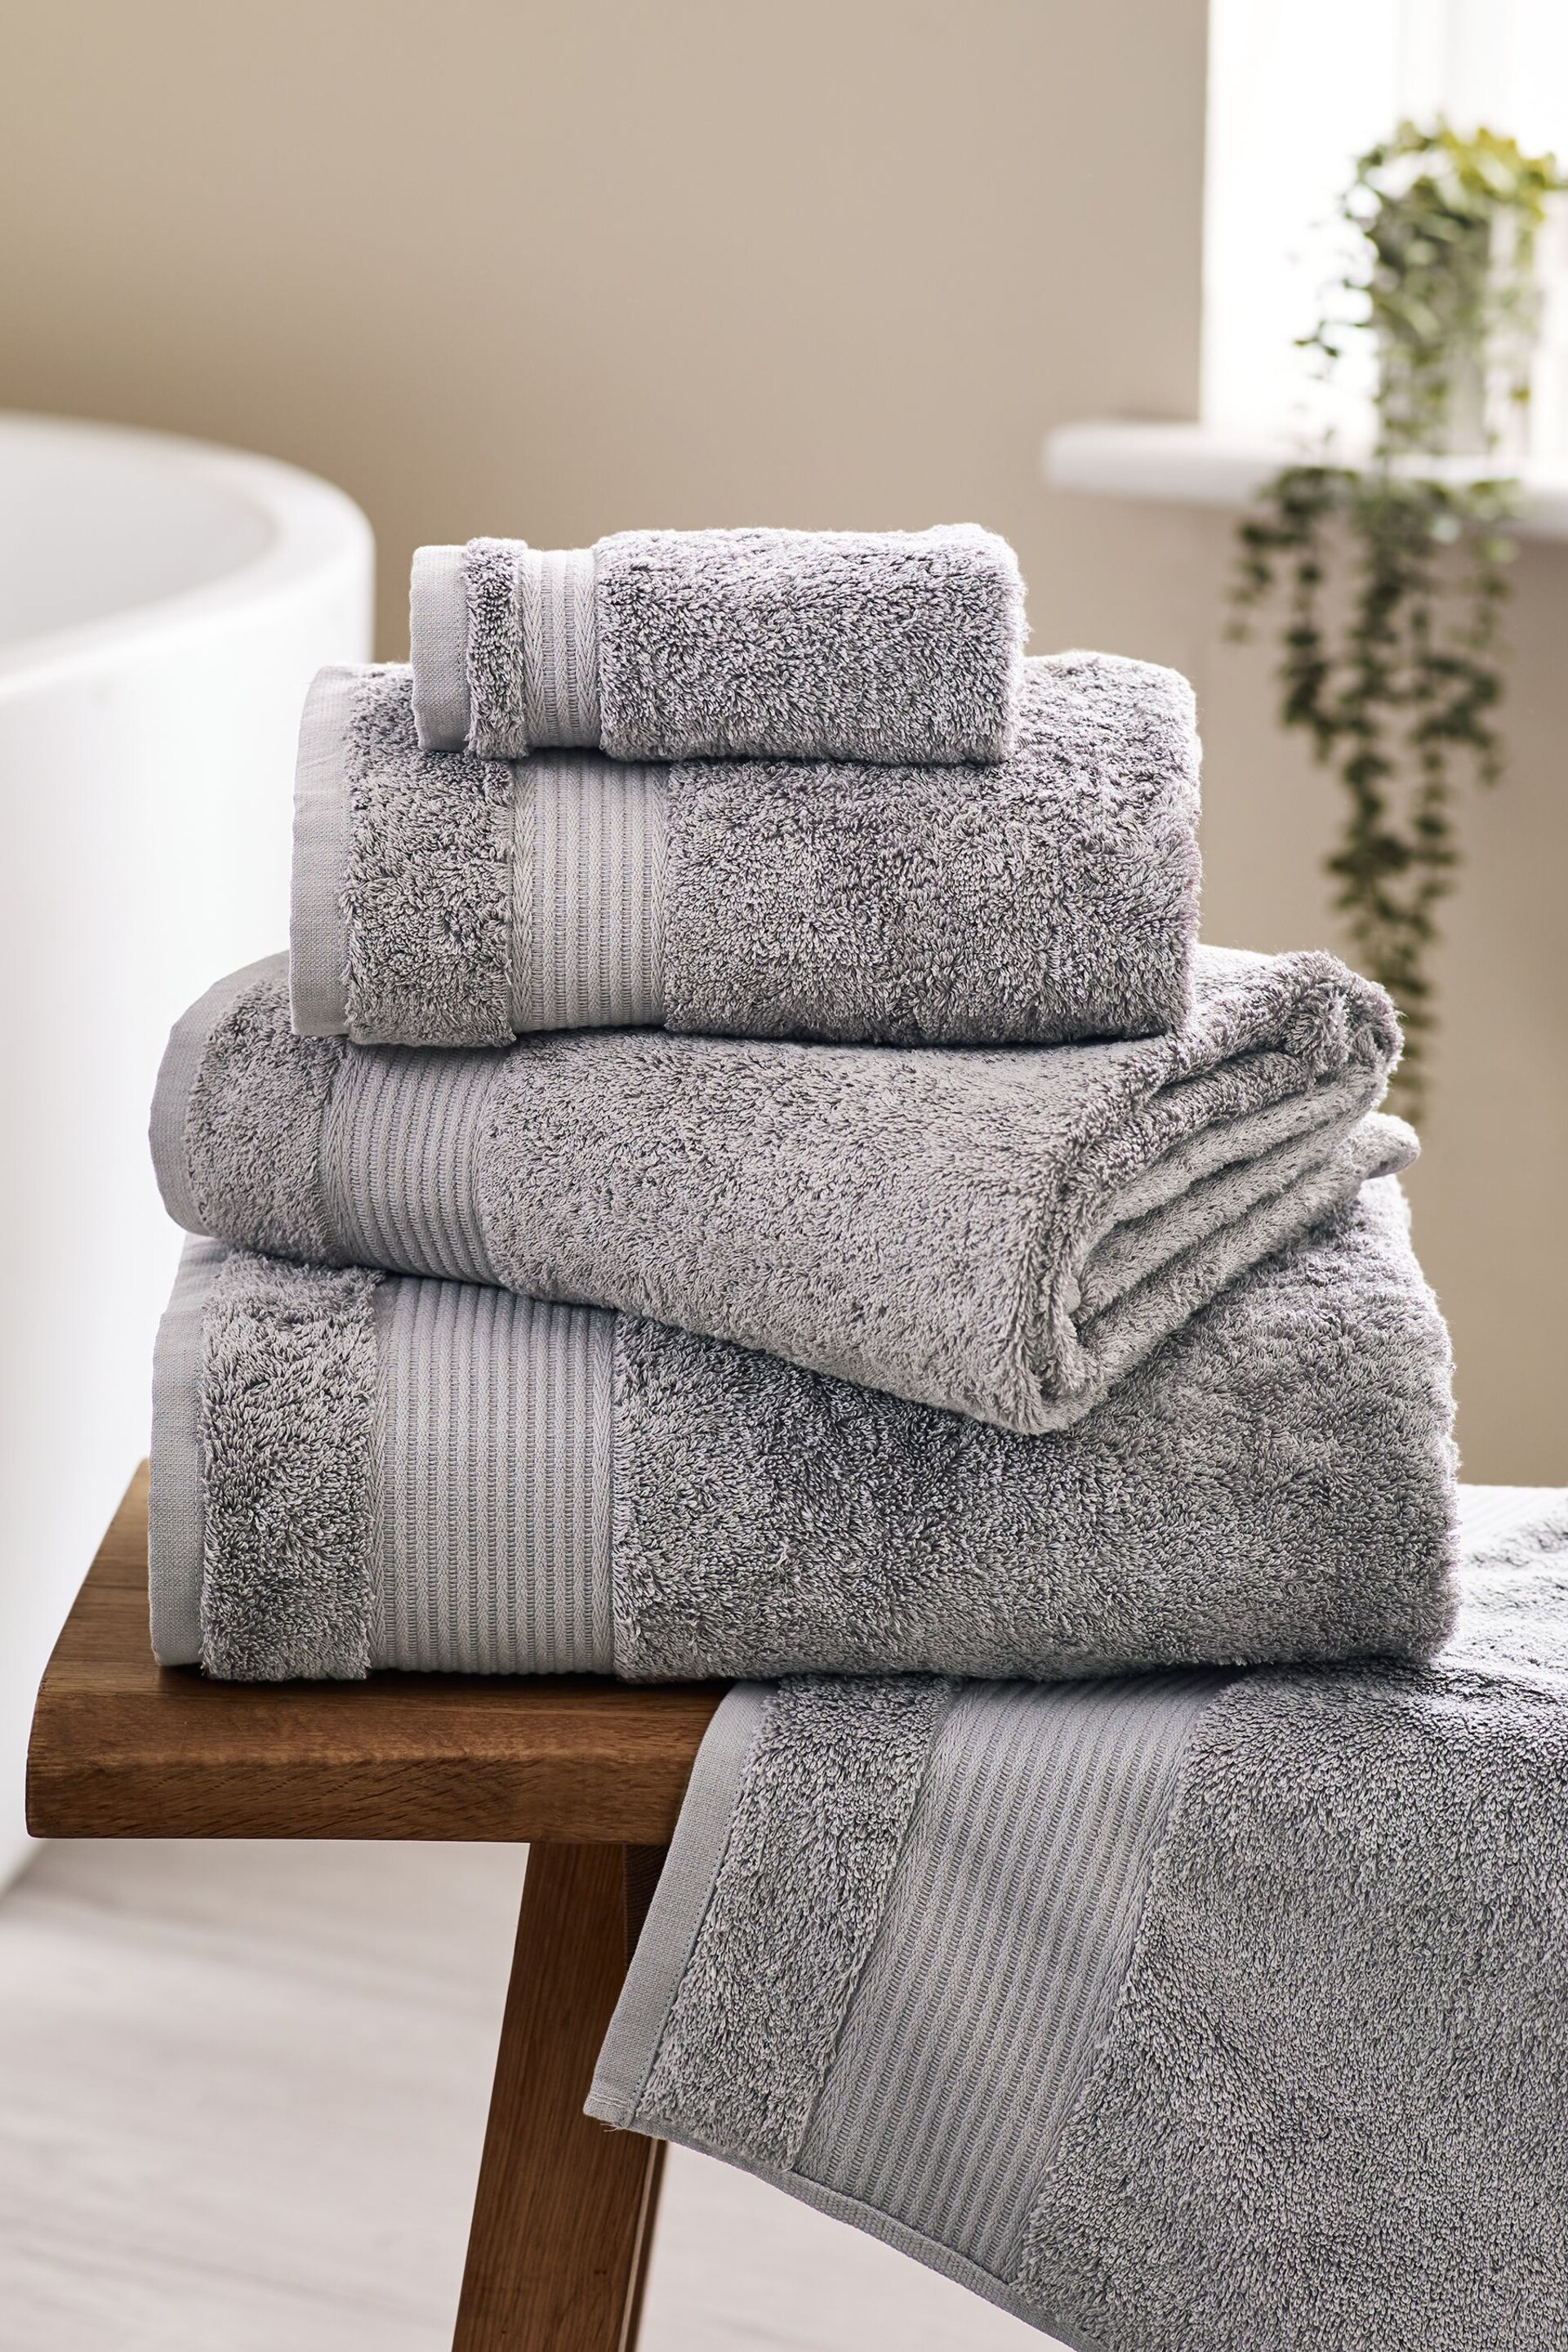 Grey Dove Egyptian Cotton Towel - Image 1 of 6